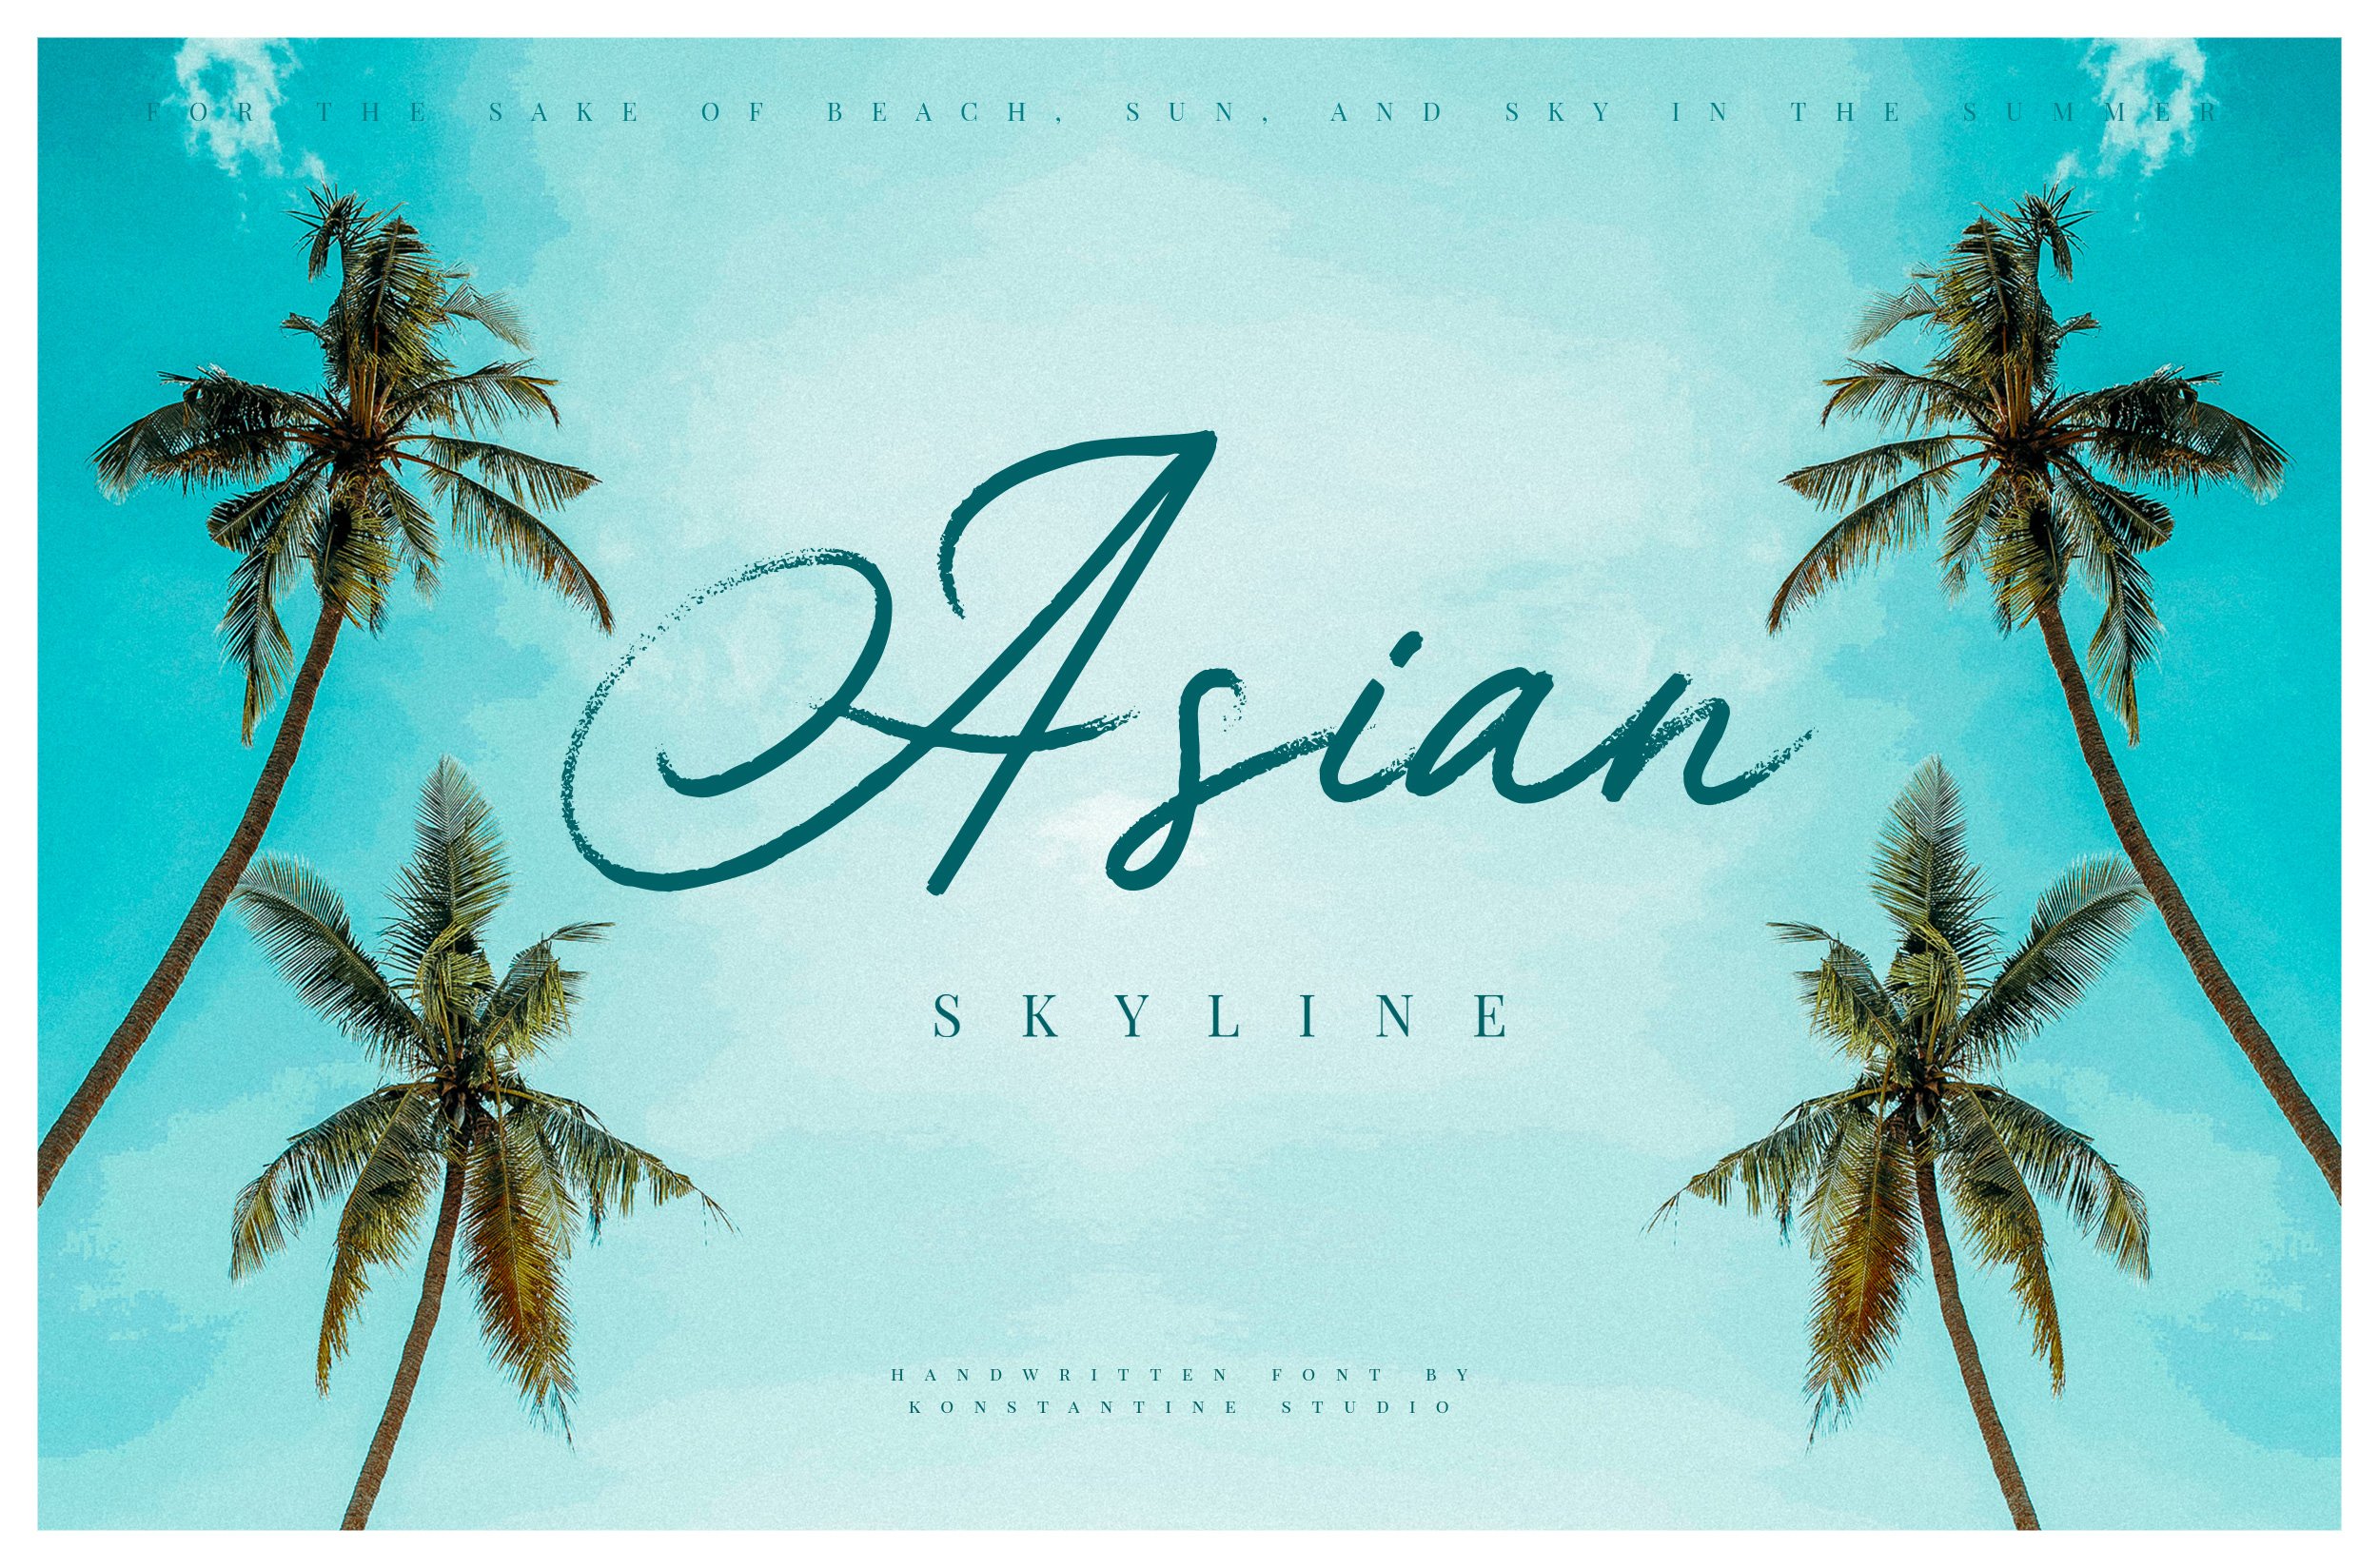 Asian Skyline - Casual Summer Font cover image.